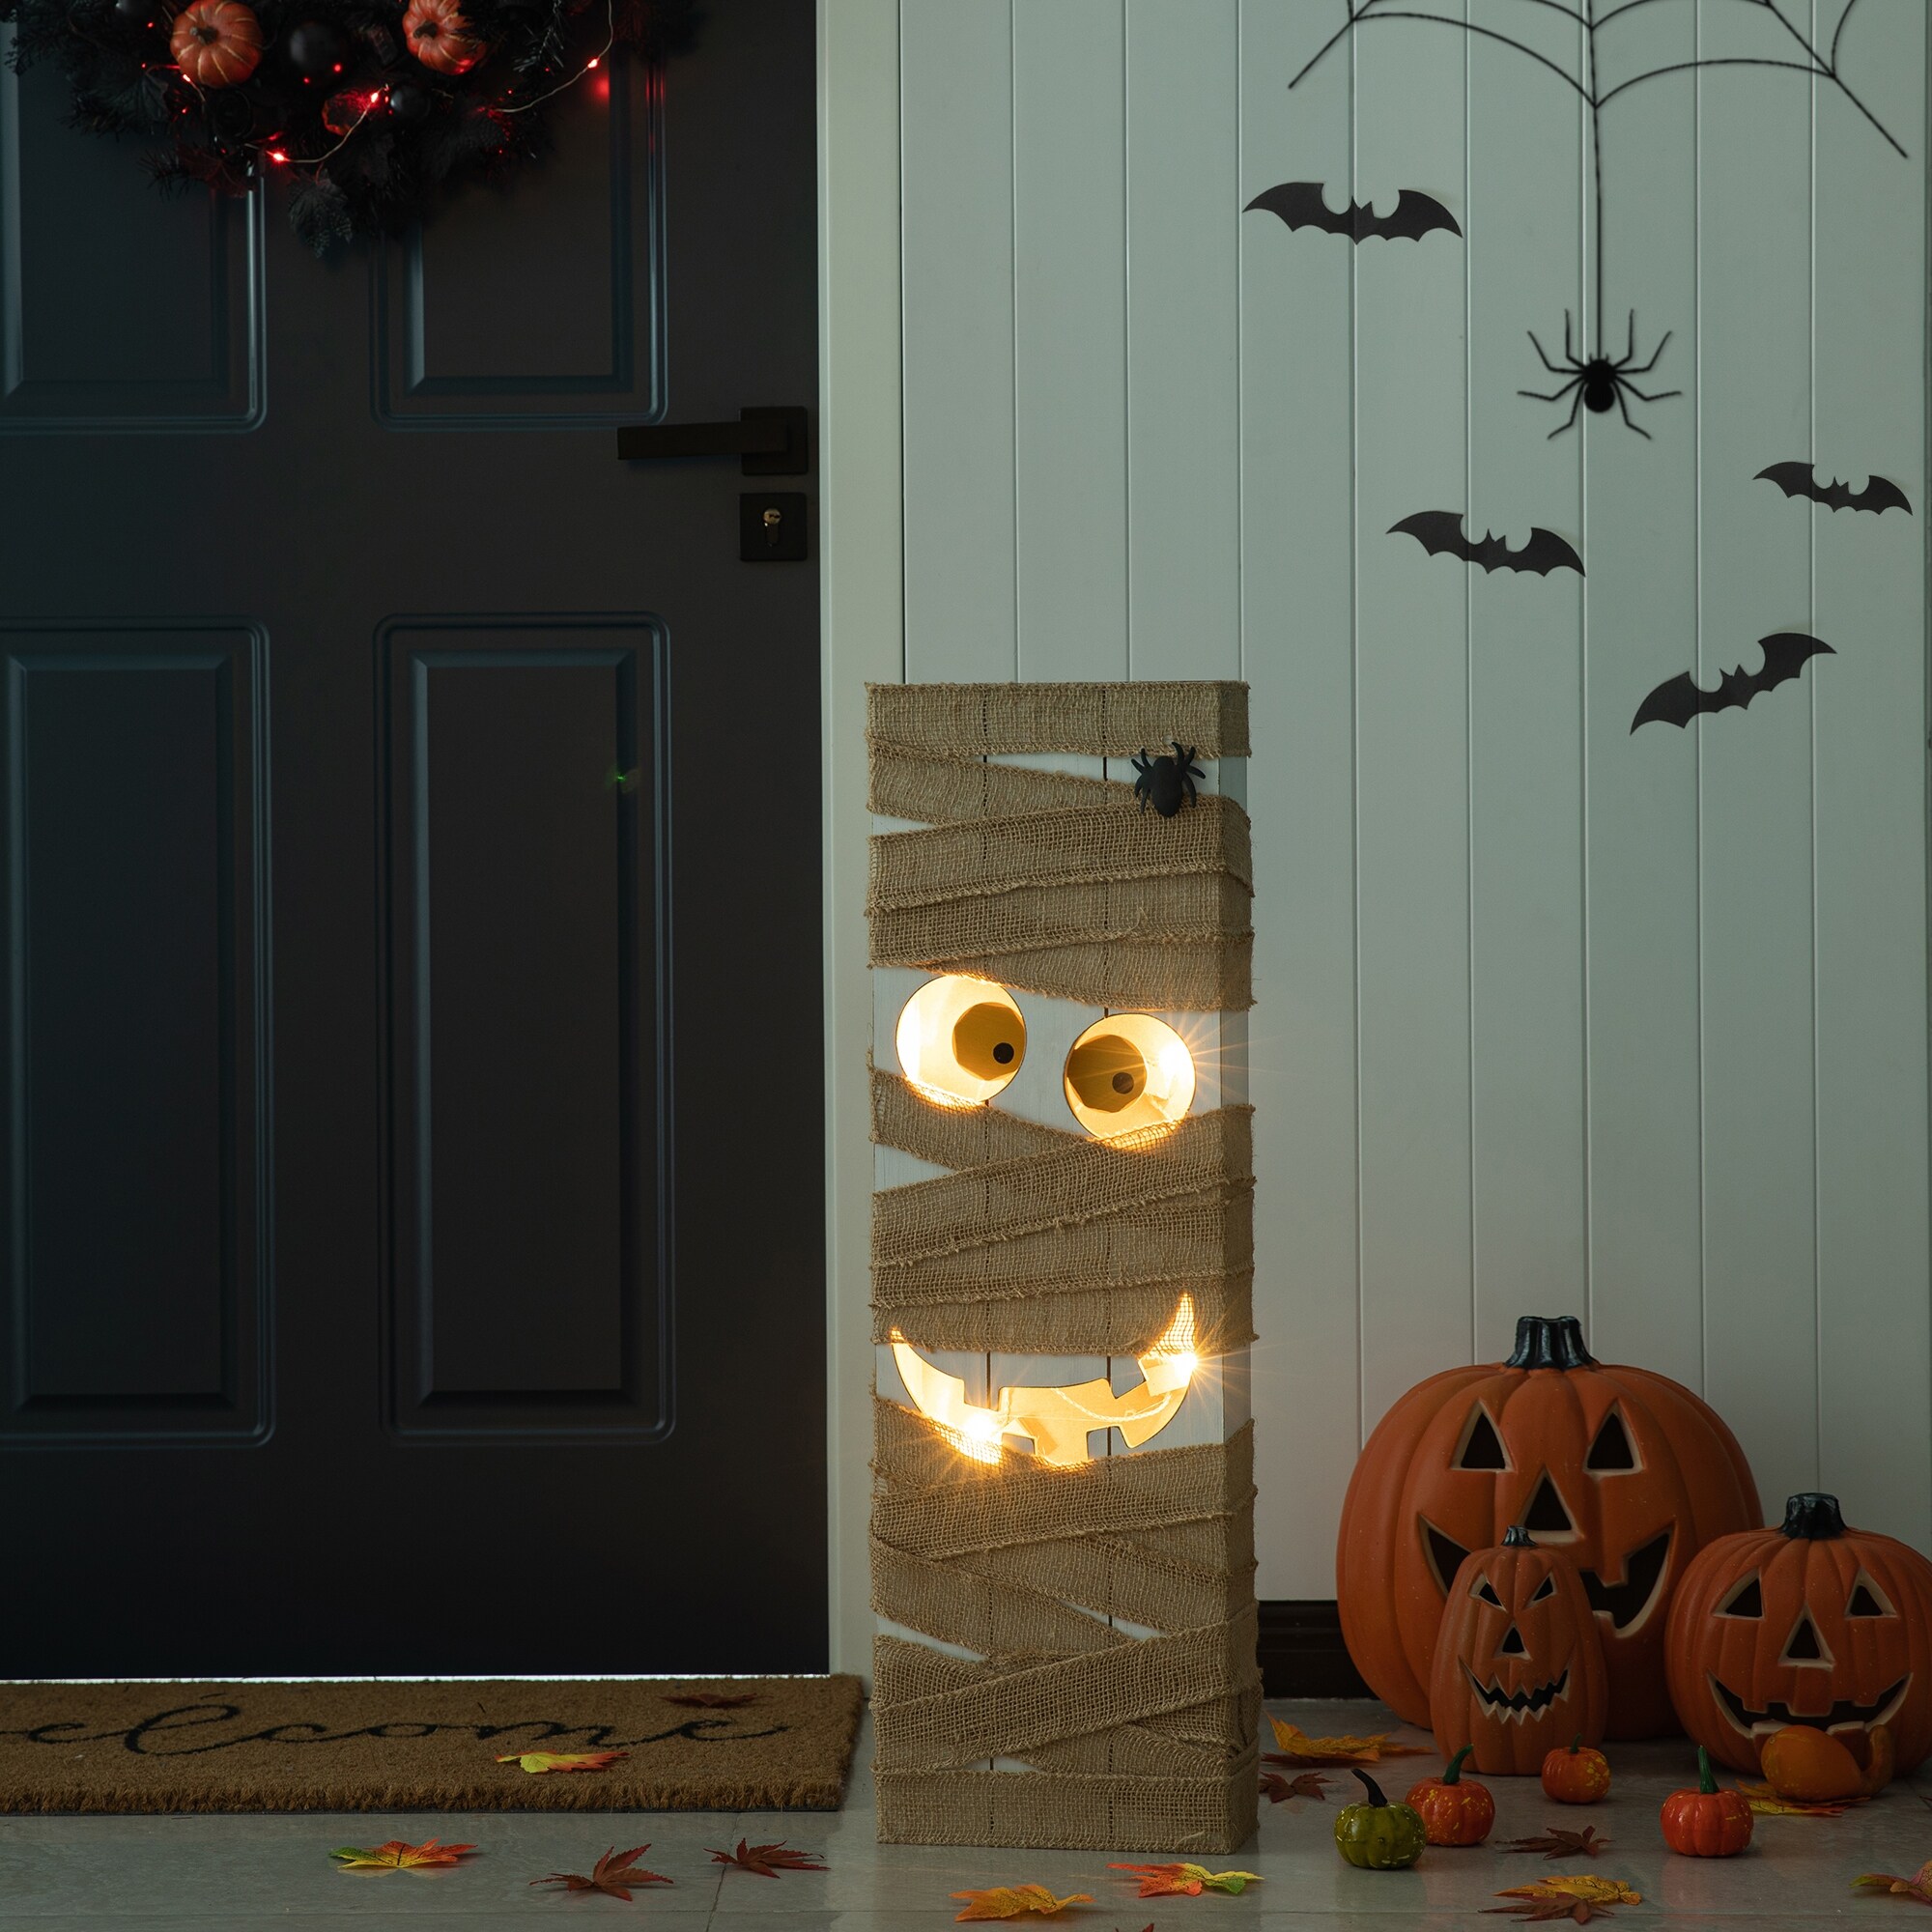 https://ak1.ostkcdn.com/images/products/is/images/direct/eba7f05456e2c1a425a59ae68b93f235a6d7c44d/Glitzhome-30%22H-LED-Lighted-Halloween-Wooden-Porch-Decor.jpg